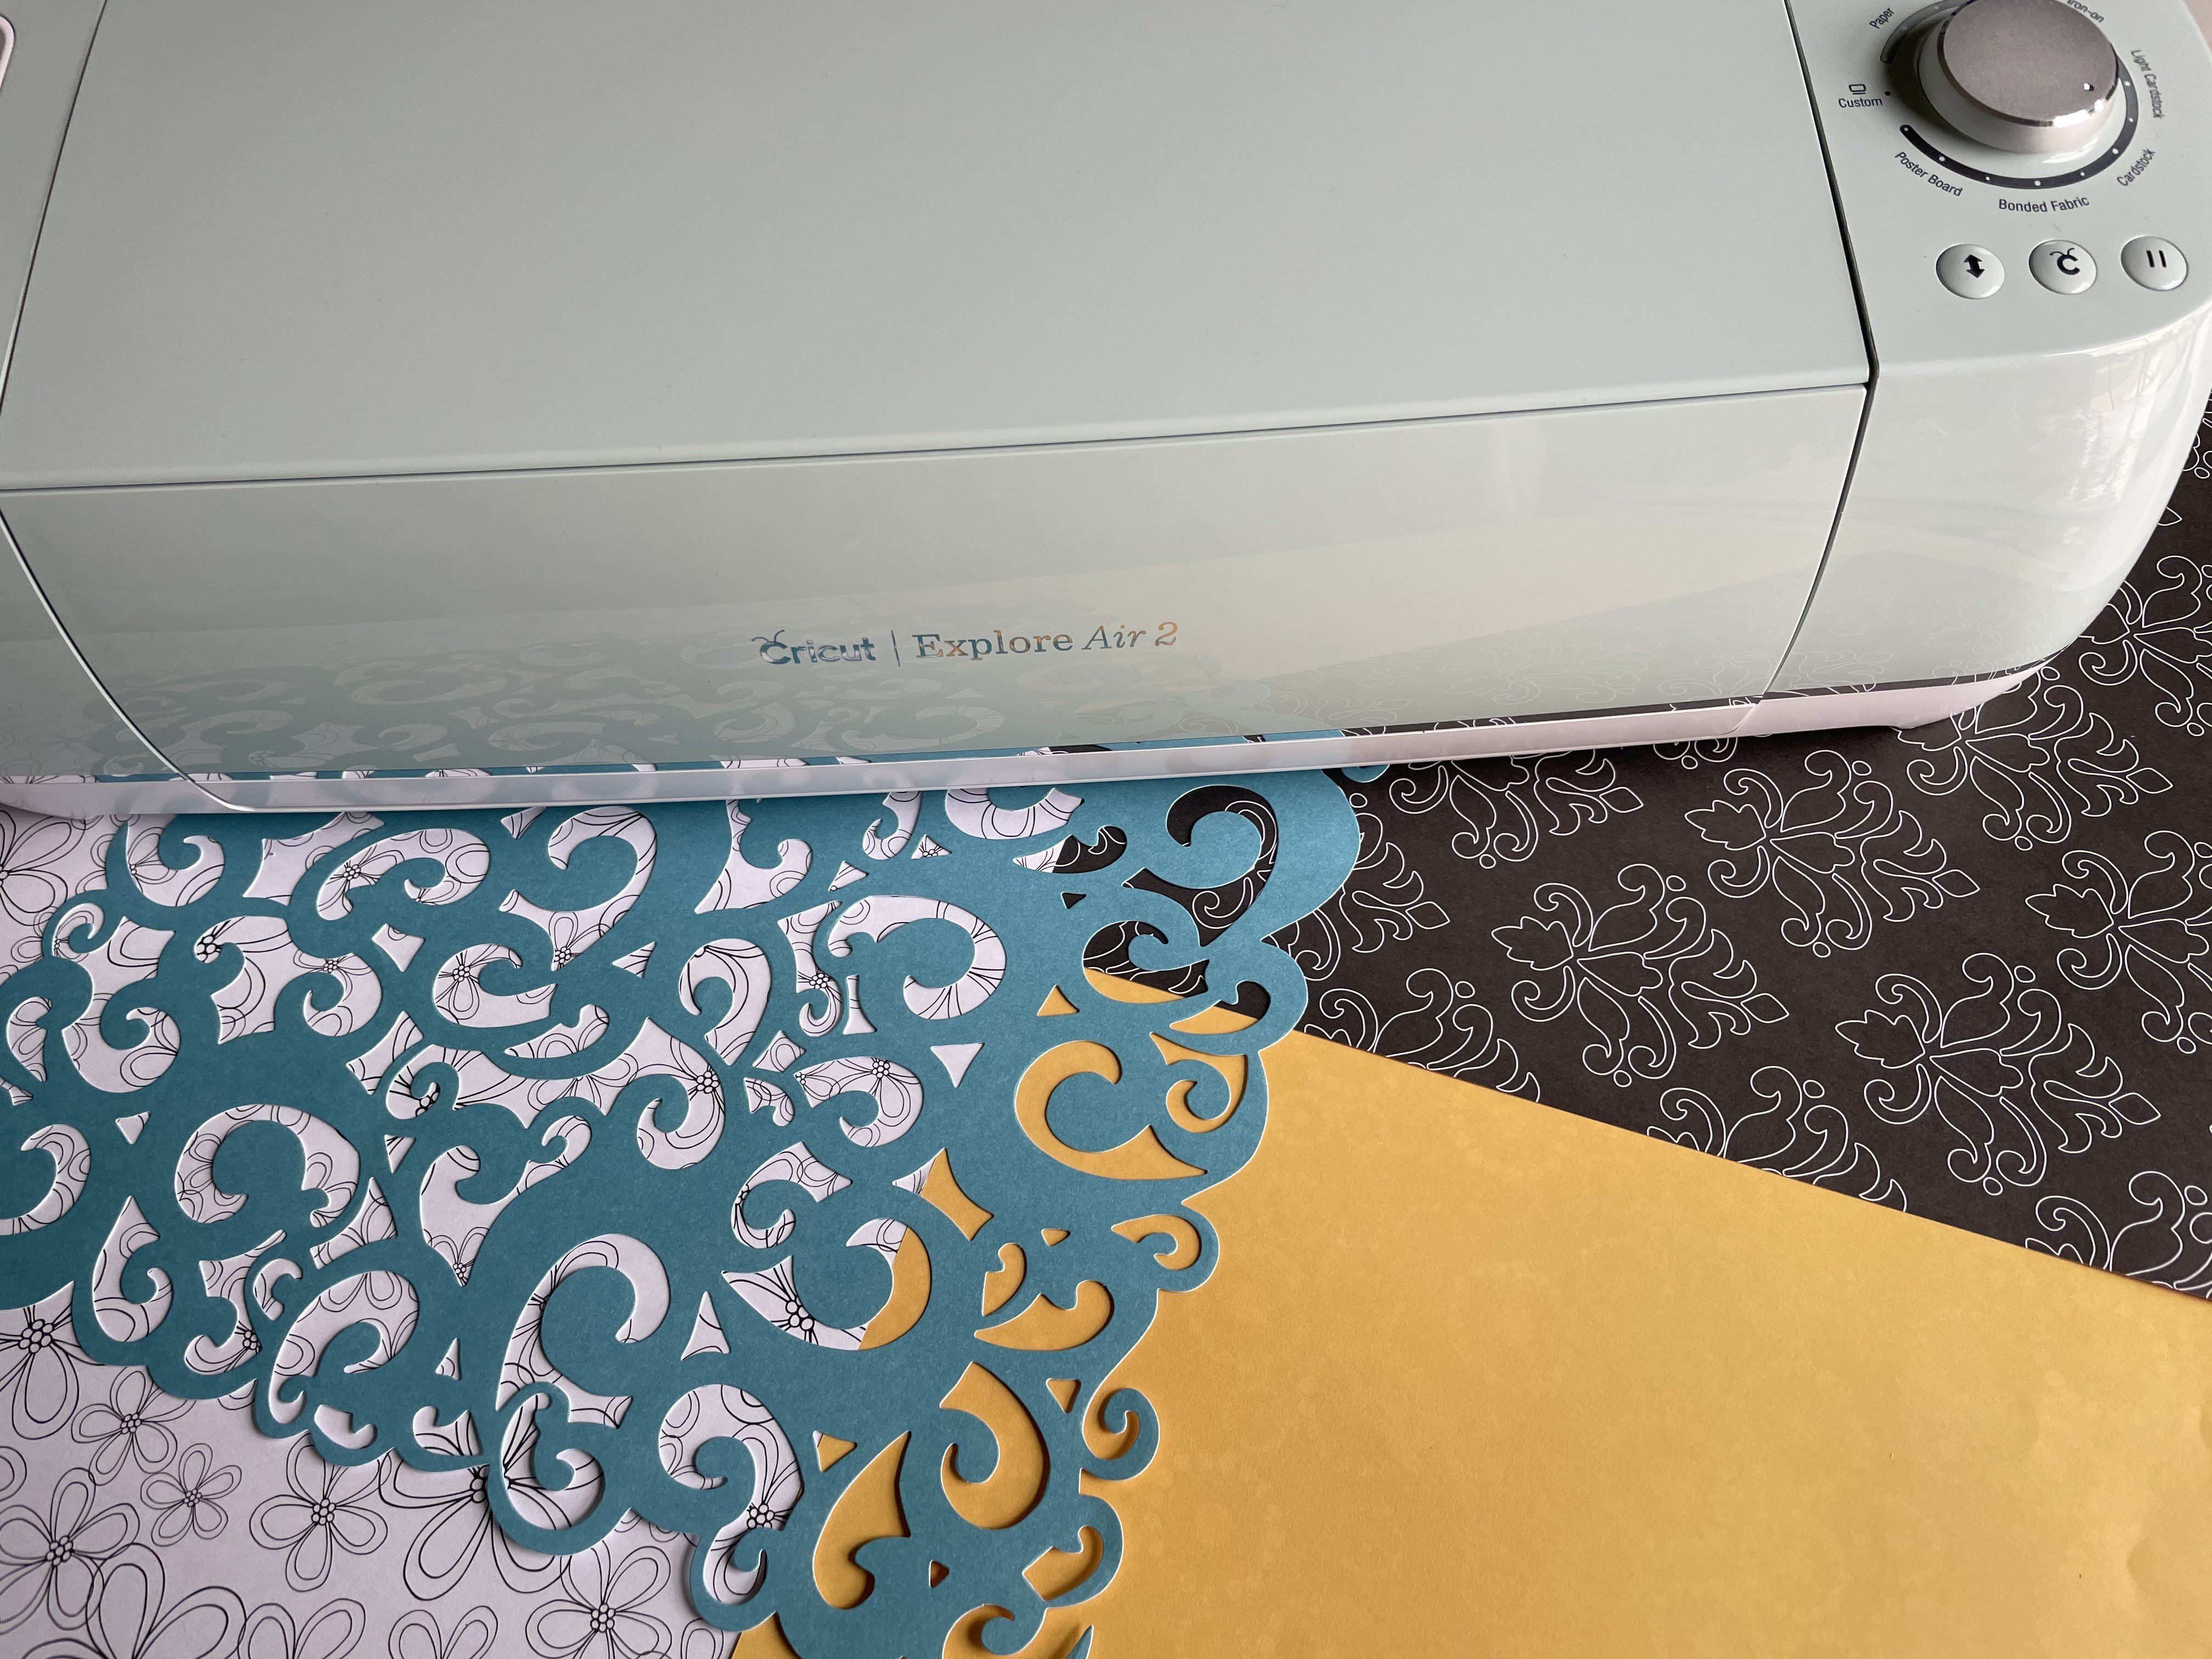 Cricut - Where to Buy it at the Best Price in Australia?